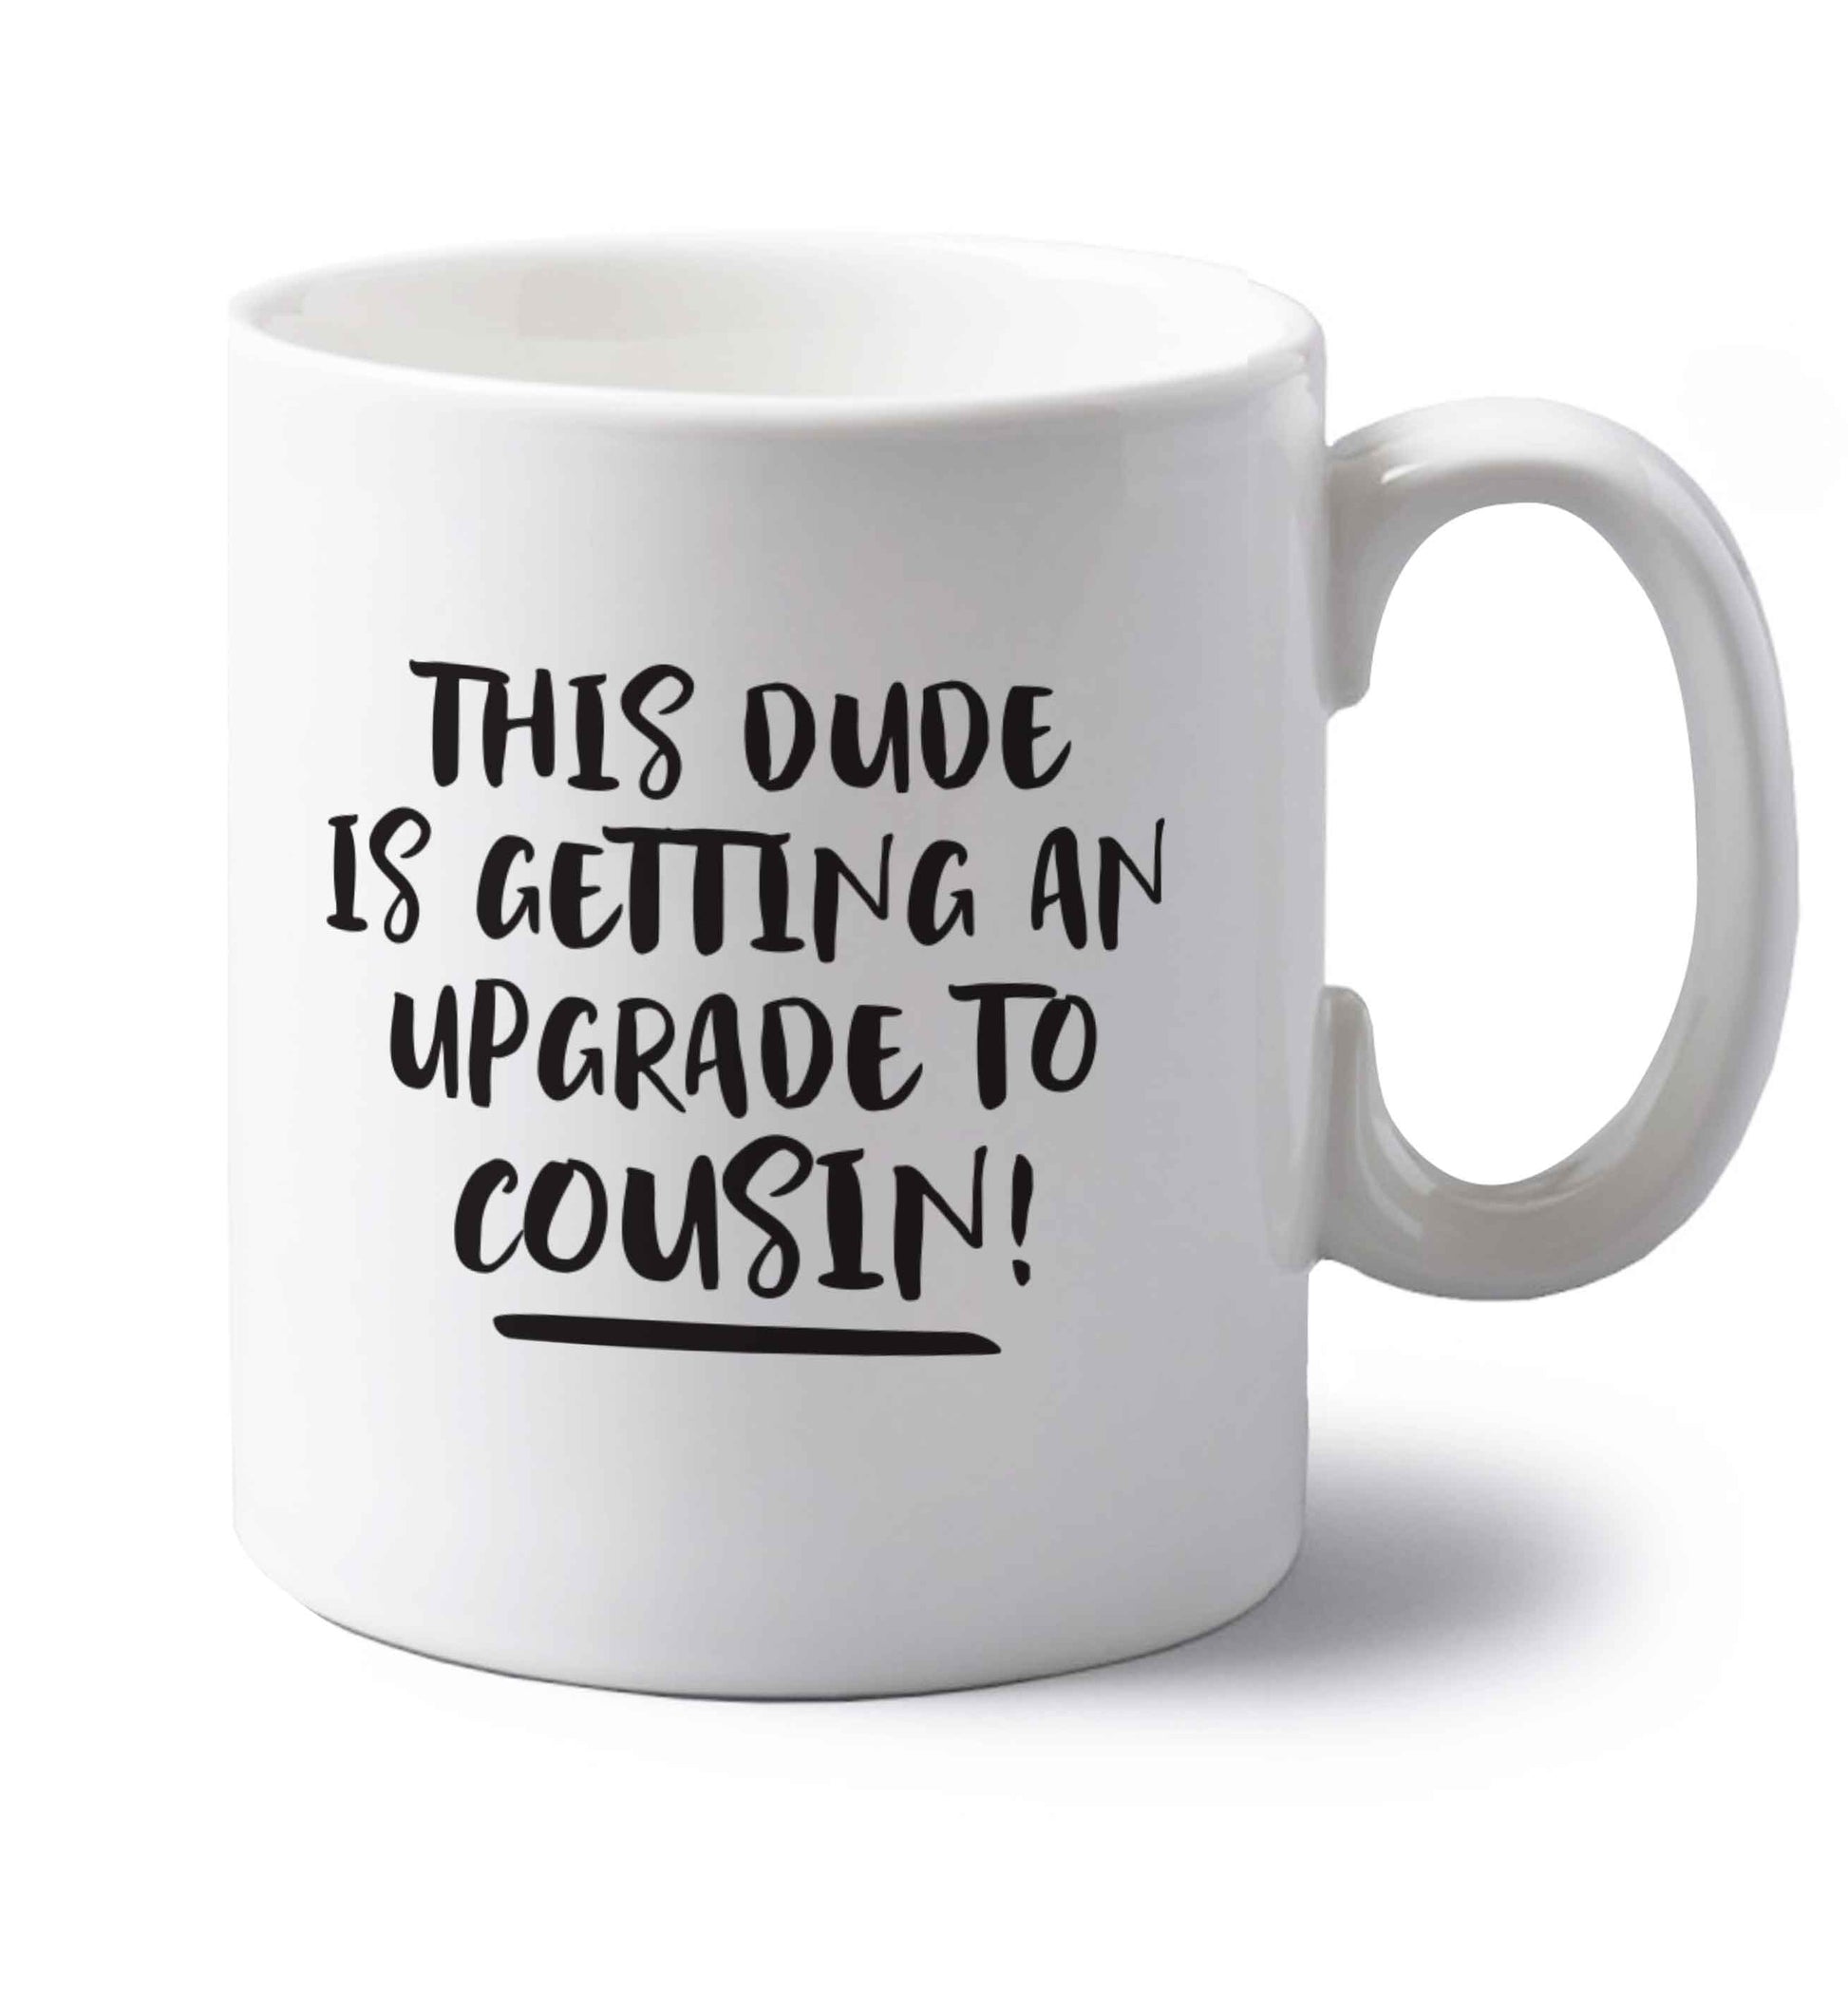 This dude is getting an upgrade to cousin! left handed white ceramic mug 